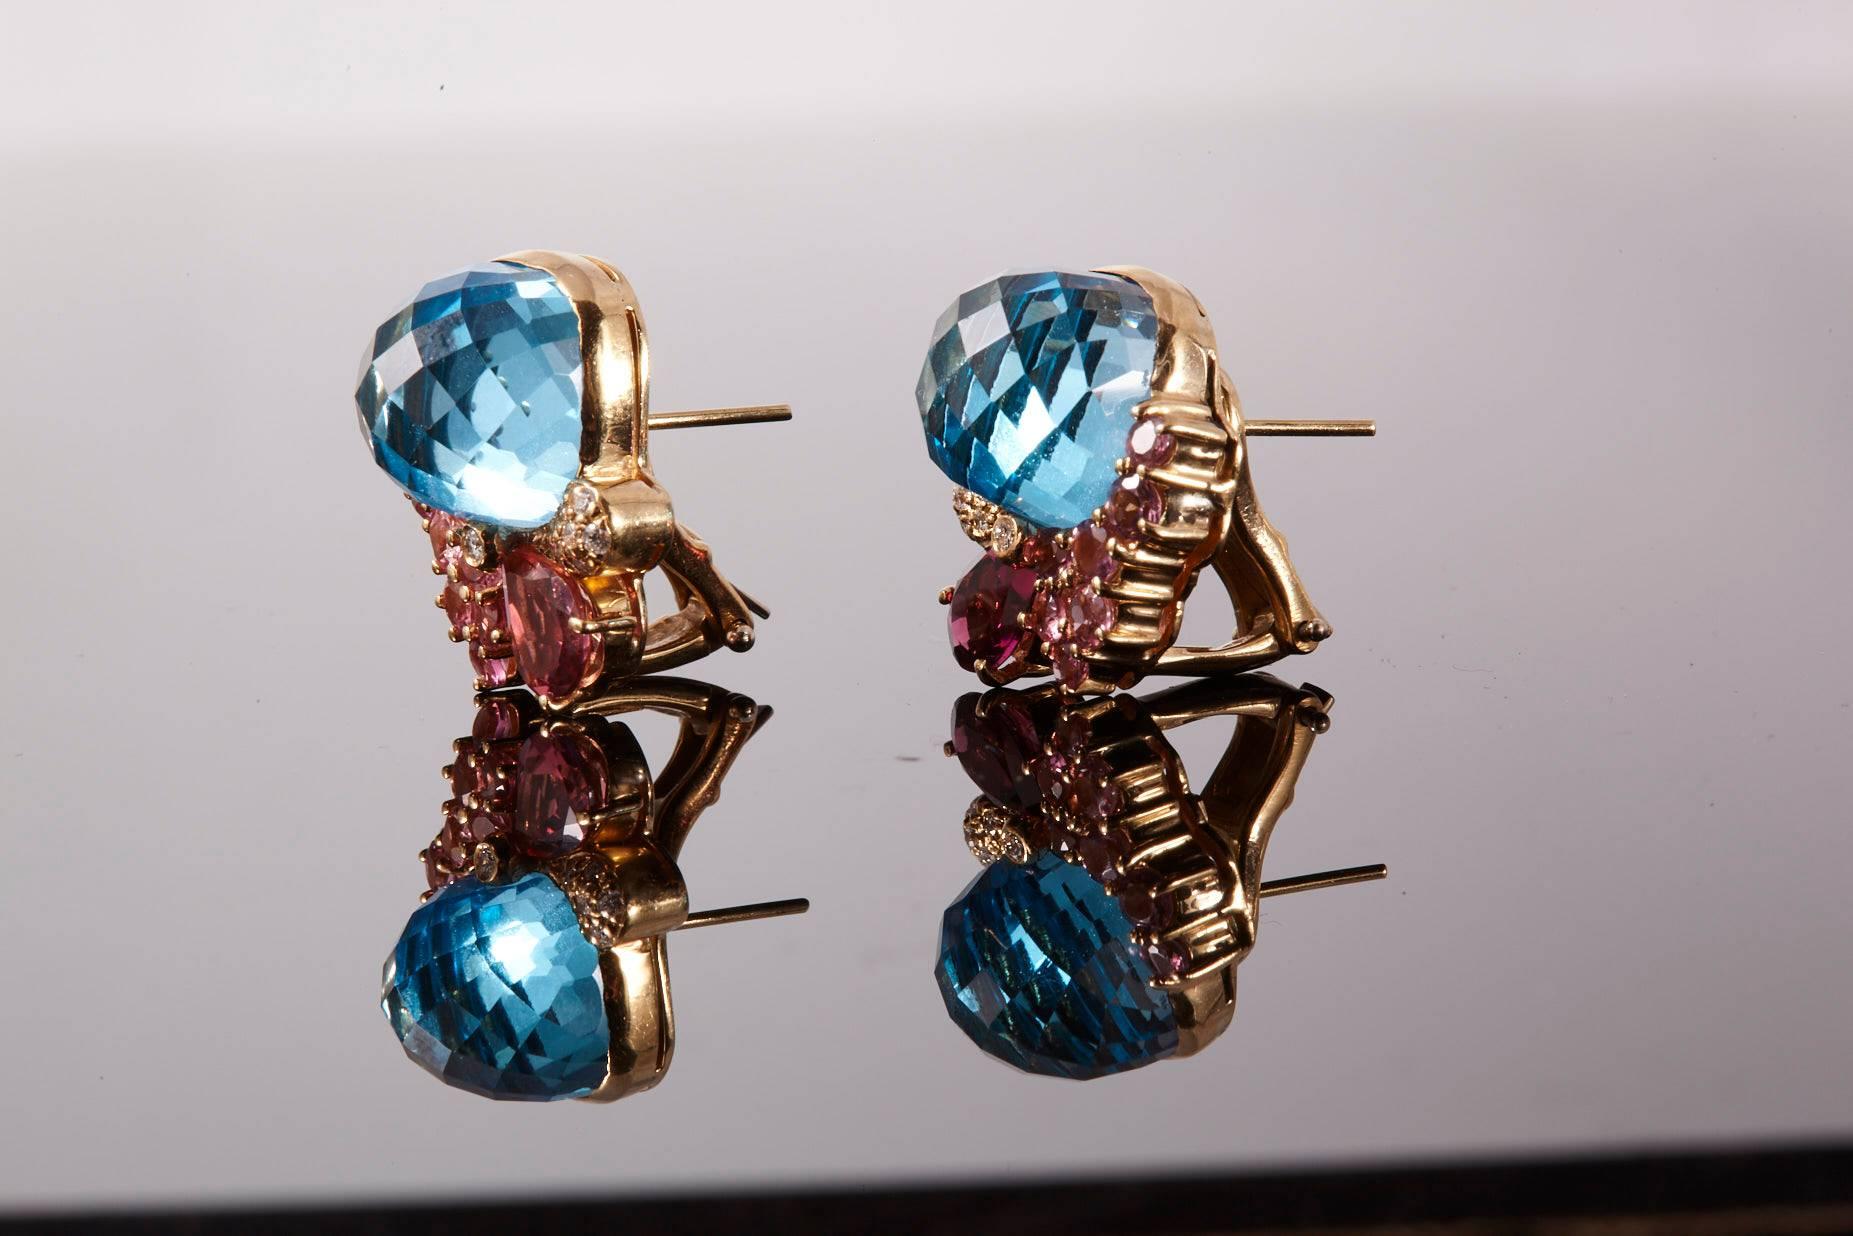 Wendee & Rene 18 Karat Yellow Gold Blue Topaz Pink Tourmaline and Diamond Ear Clip.
Vivid Blue Topaz surrounded in an asymmetrical Pink Tourmaline and Diamonds design. Each clip has one square (cushion shape), dome faceted Blue Topaz, one large pear